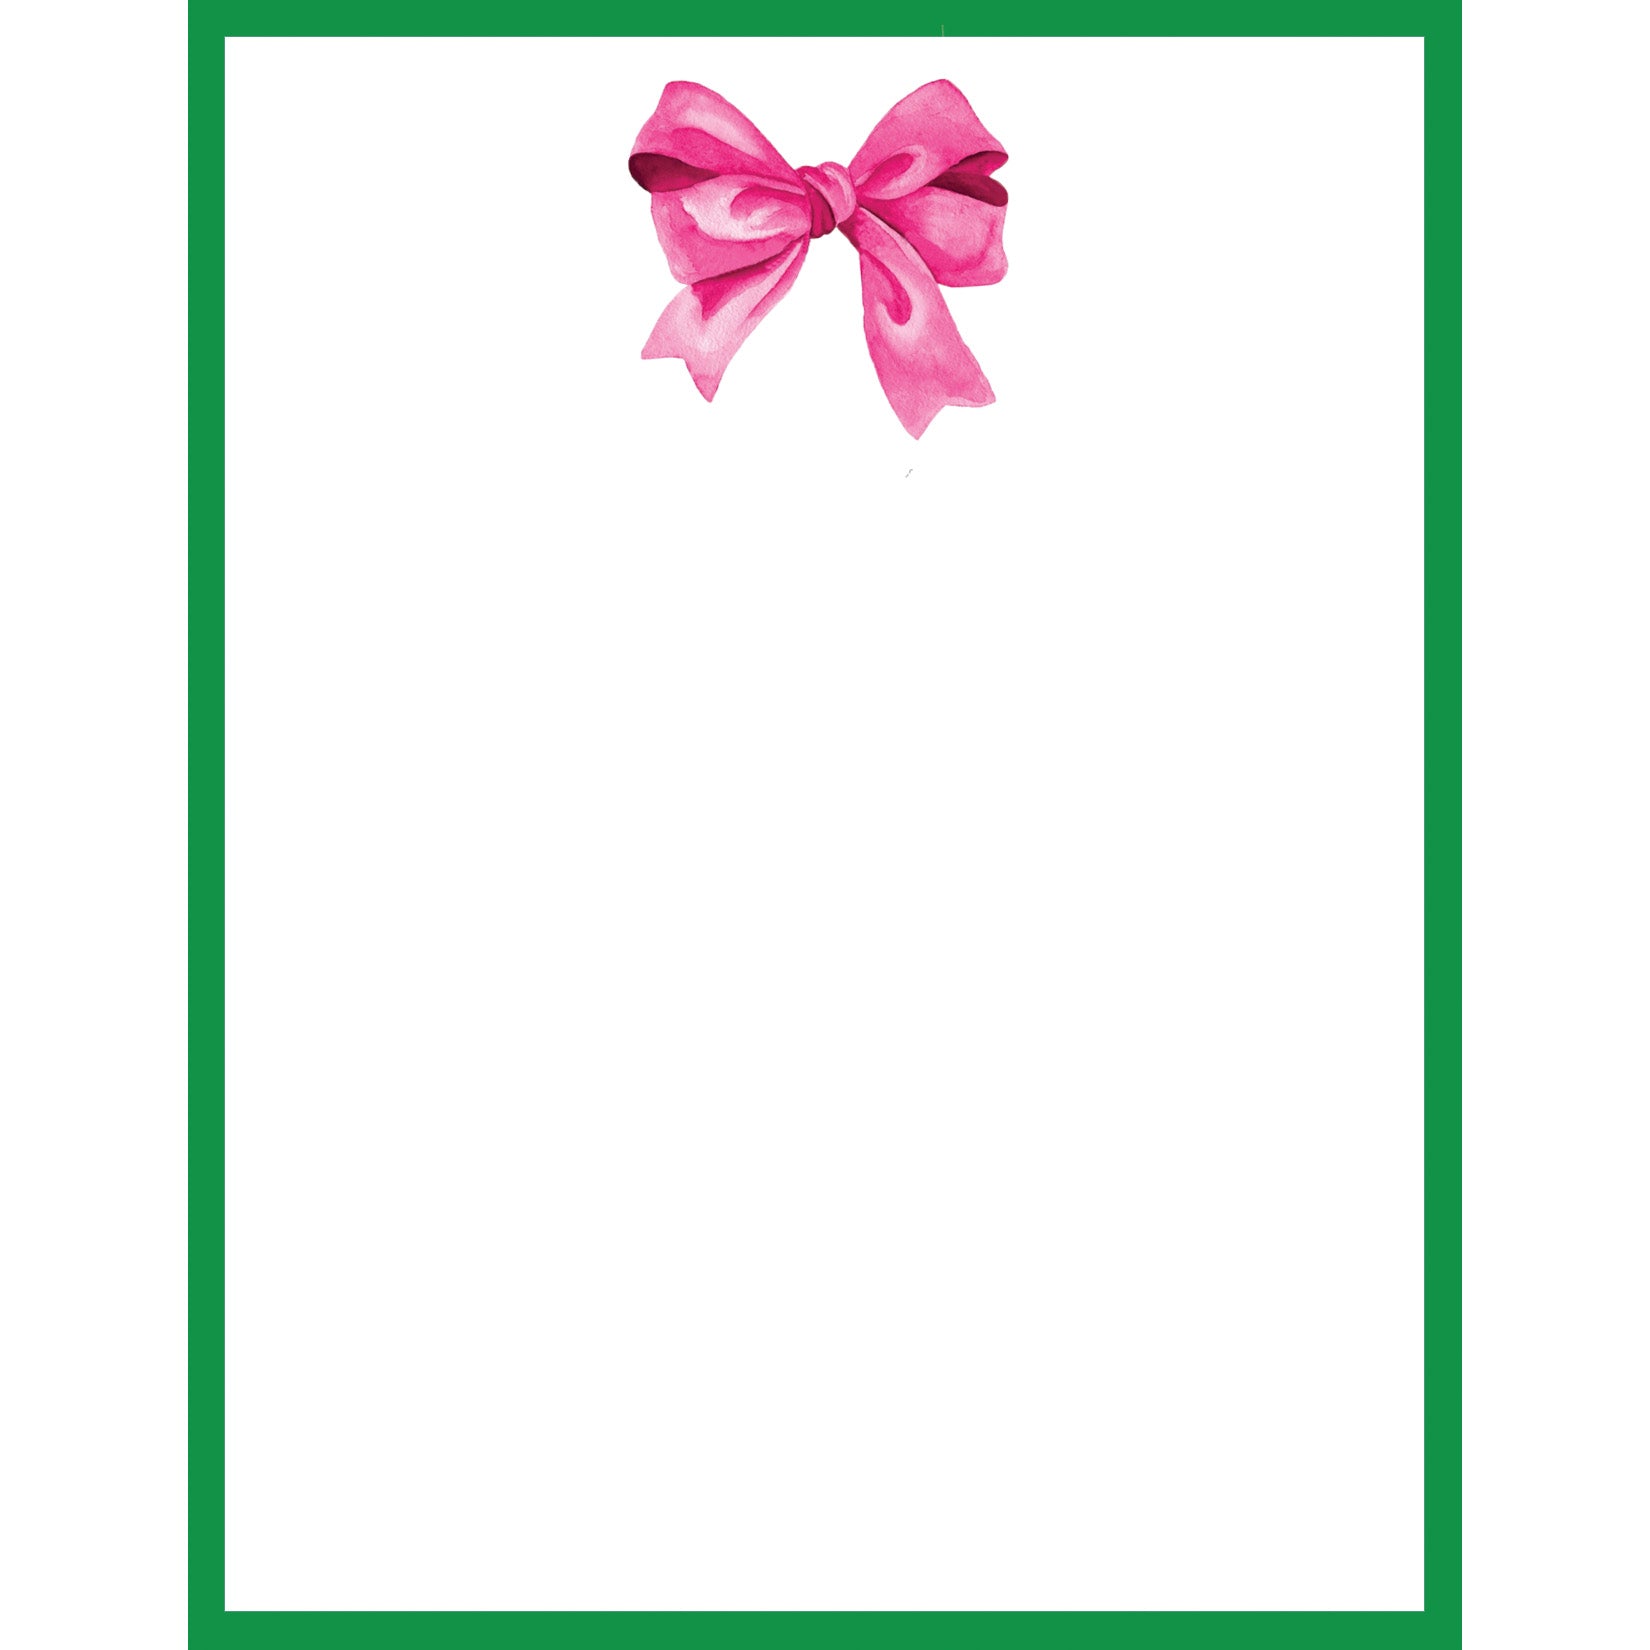 In Stock 4.25x5.5 Pink Bow Notepad